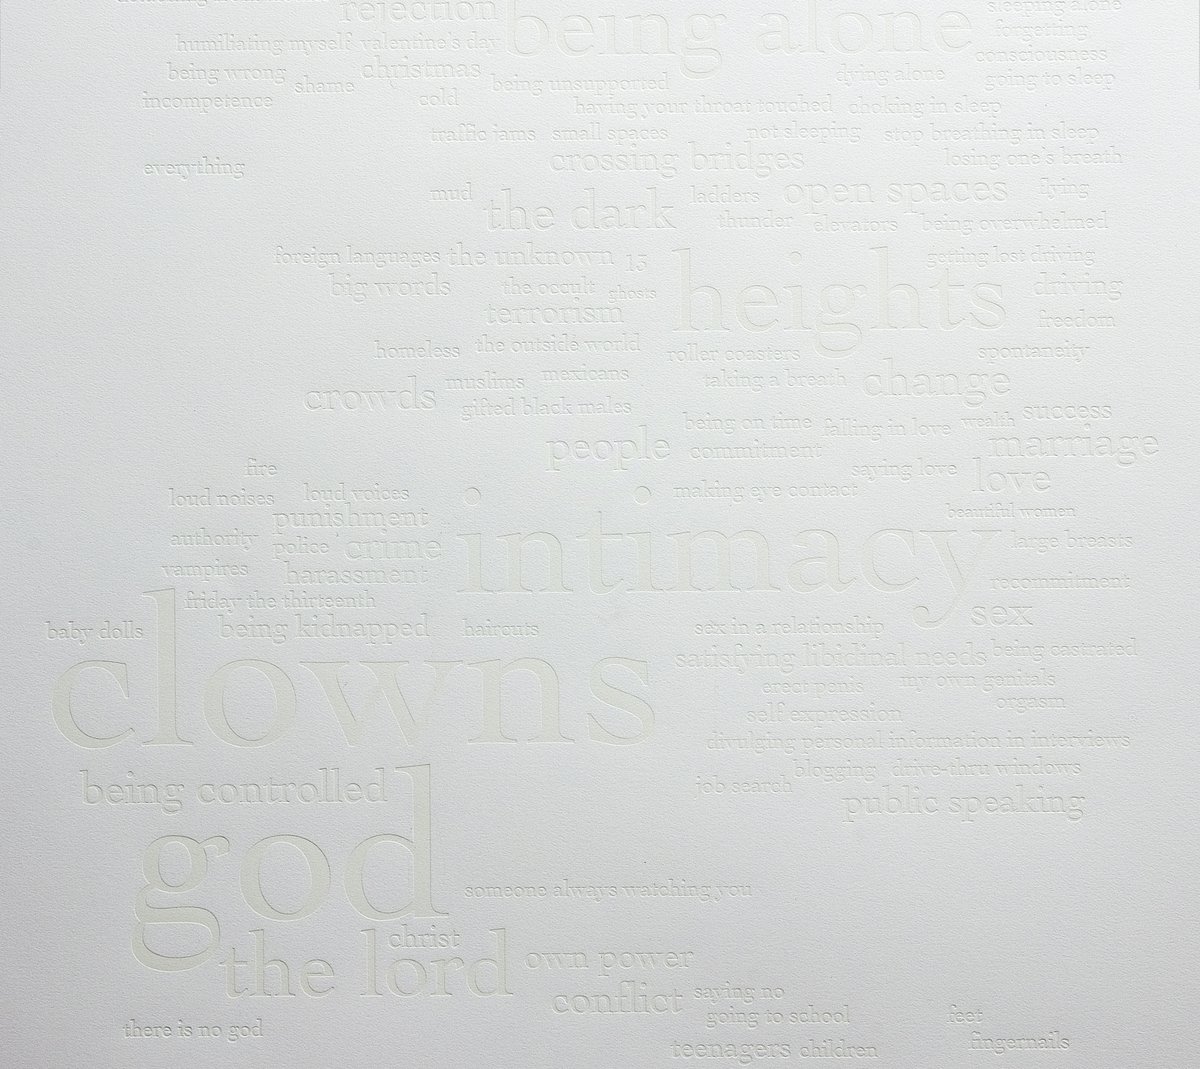 Image of Most Searched Fears Letterpress Print